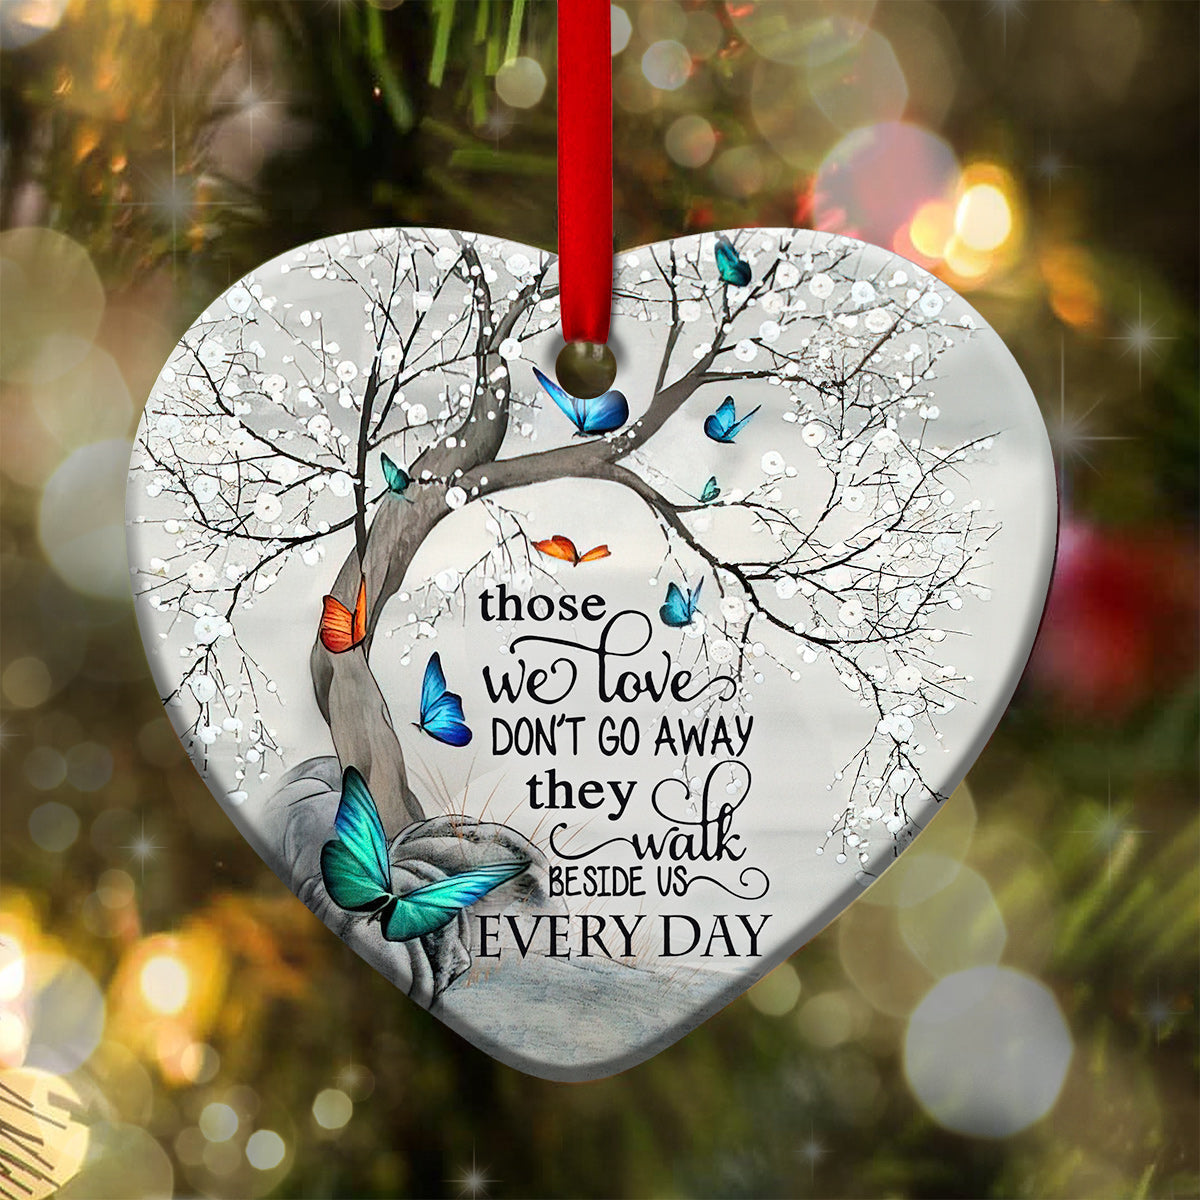 butterfly-those-we-love-dont-go-away-they-walk-beside-us-every-day-heart-ornament